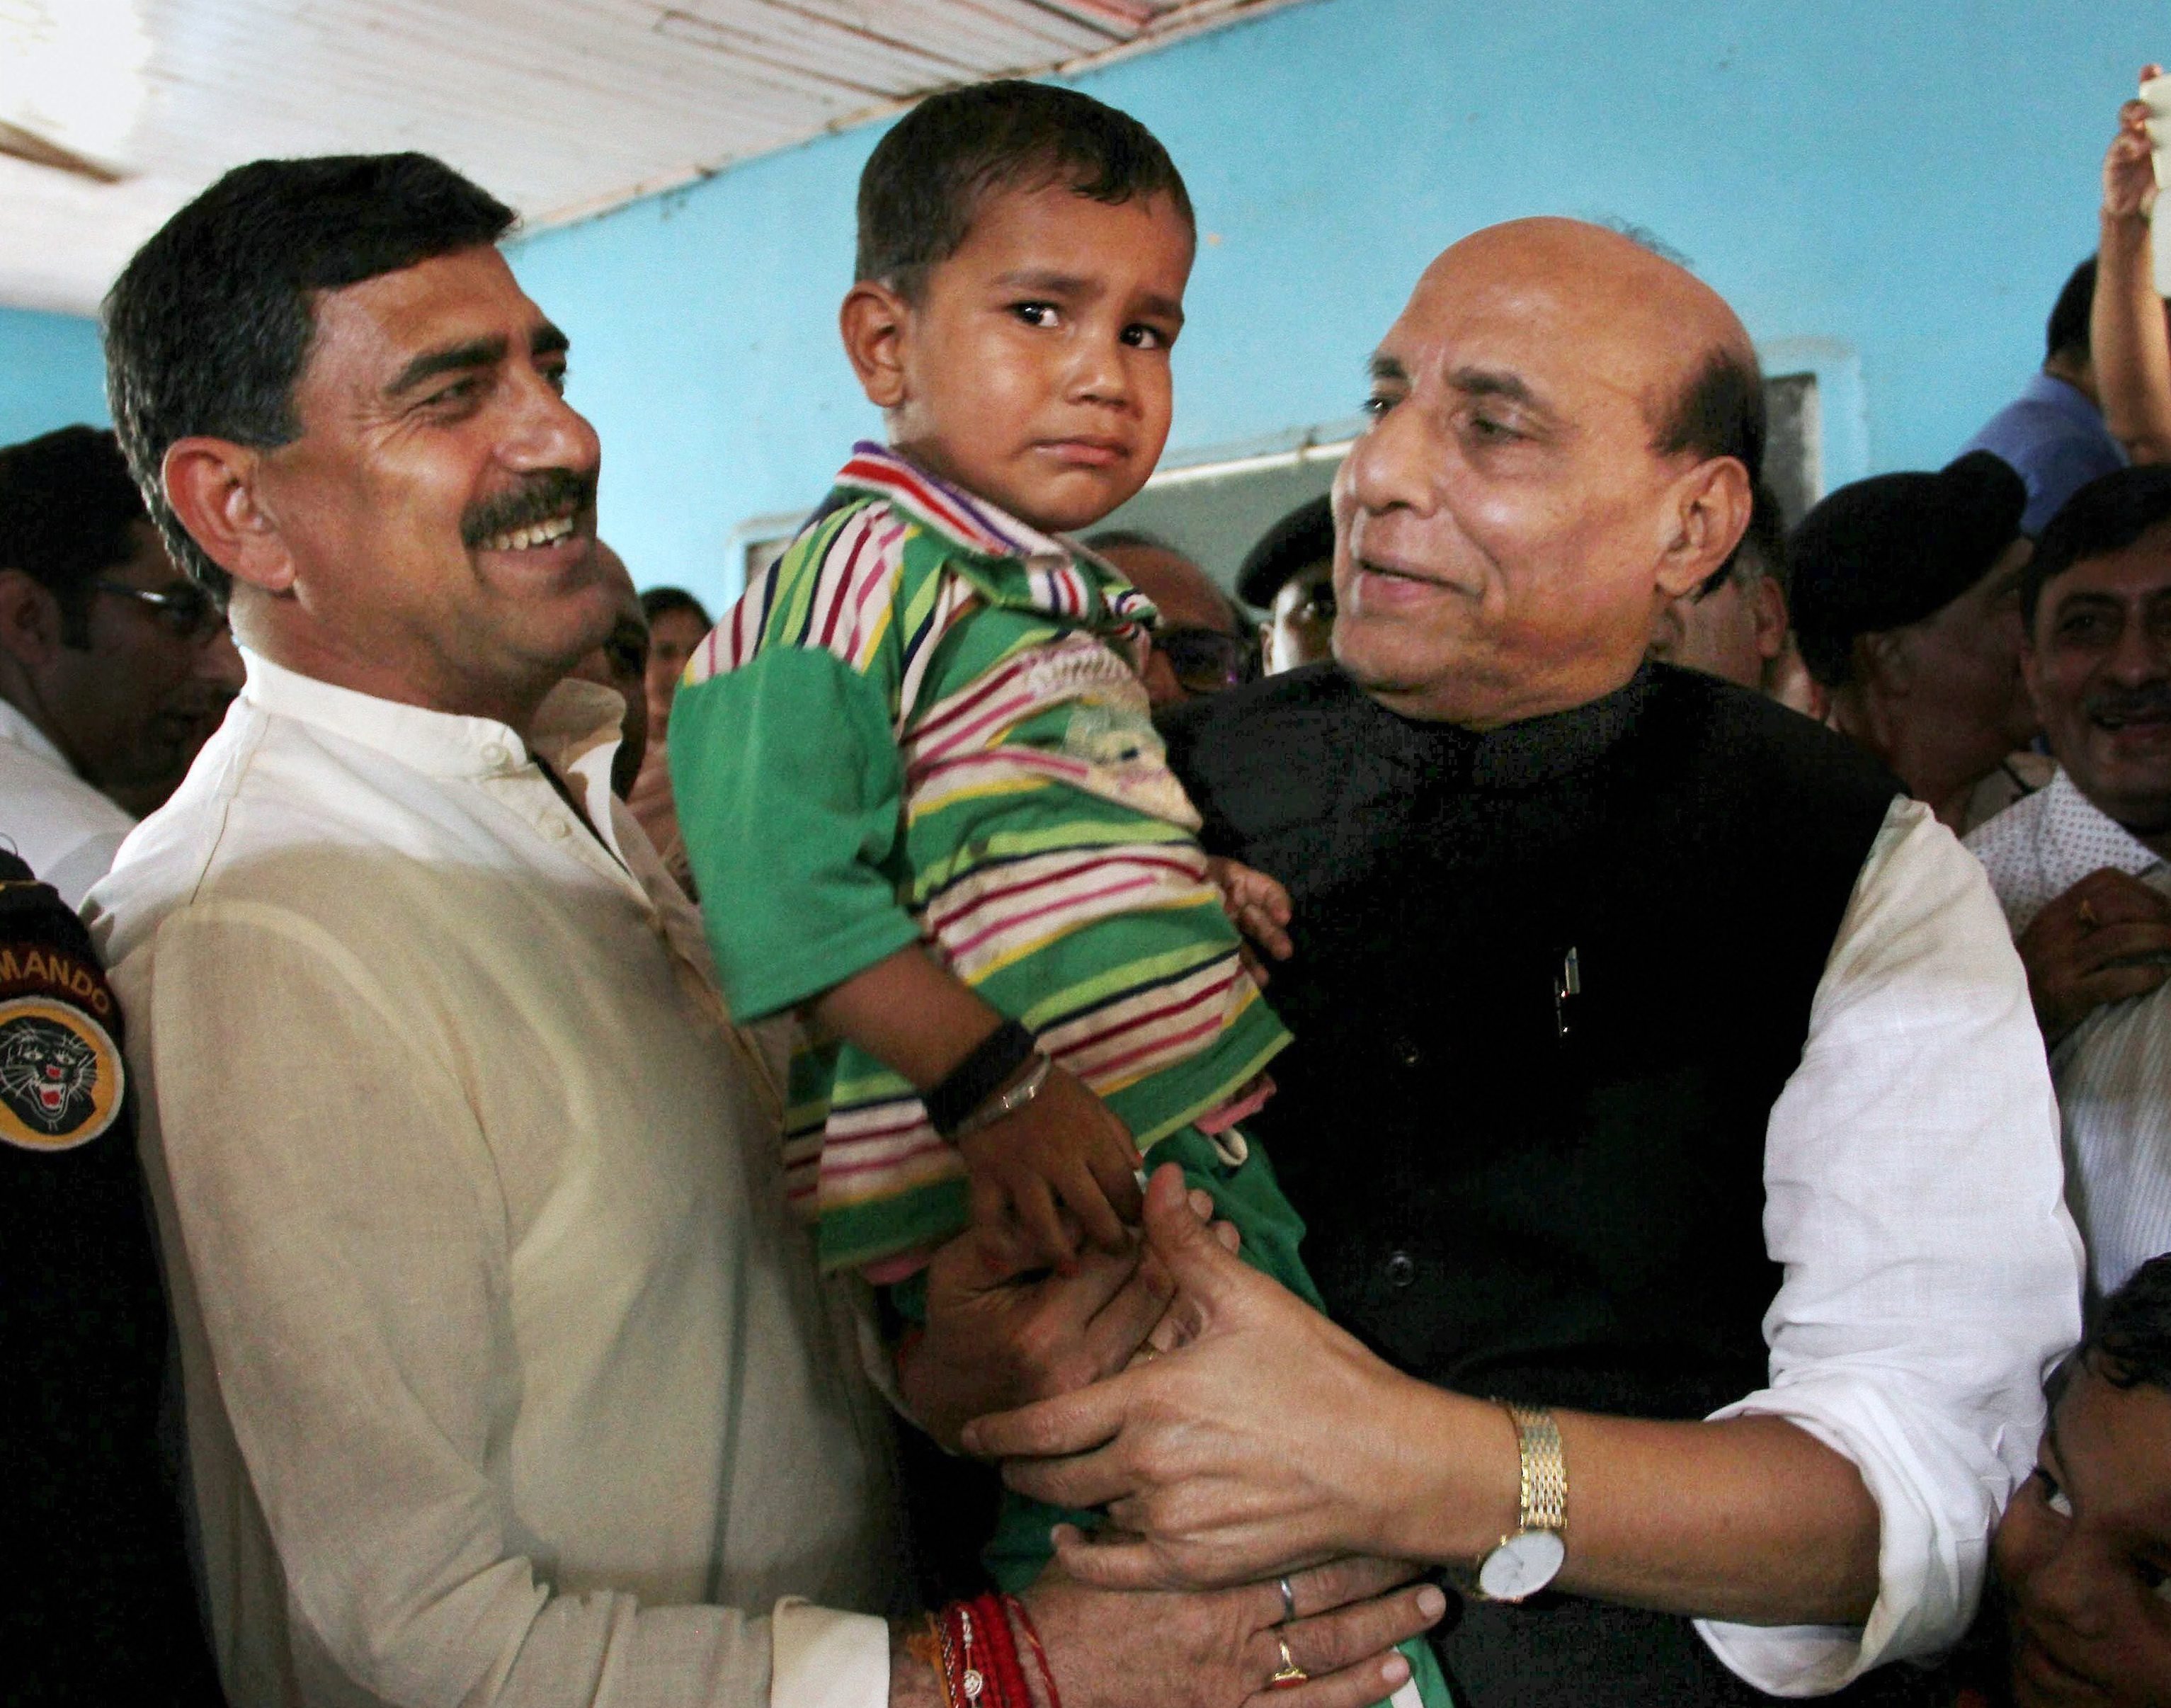 Rajouri: Union Home Minister Rajnath Singh interacts with a child during his visit to a border migrants camp in Nowshera sector of Rajouri district on Monday. PTI Photo (PTI9_11_2017_000119B)